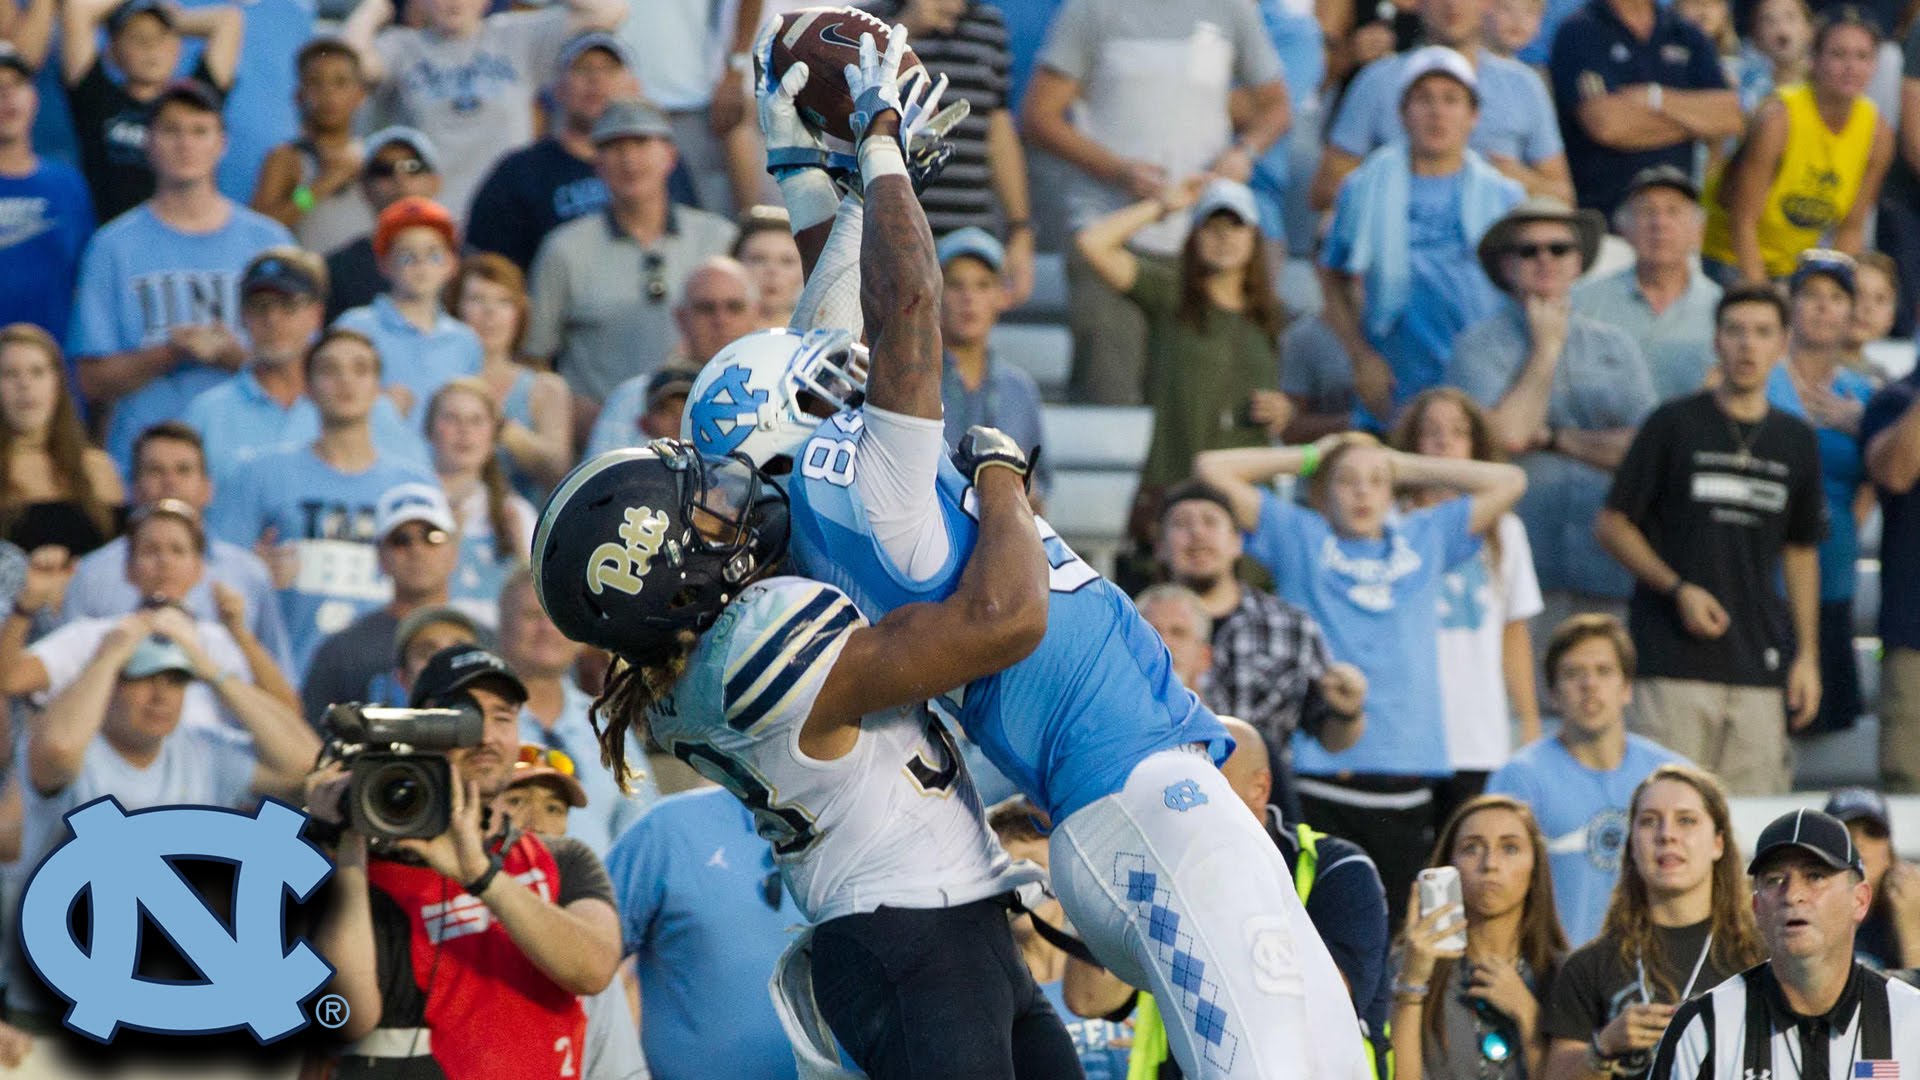 North Carolina beats Pittsburgh on a last second touchdown pass